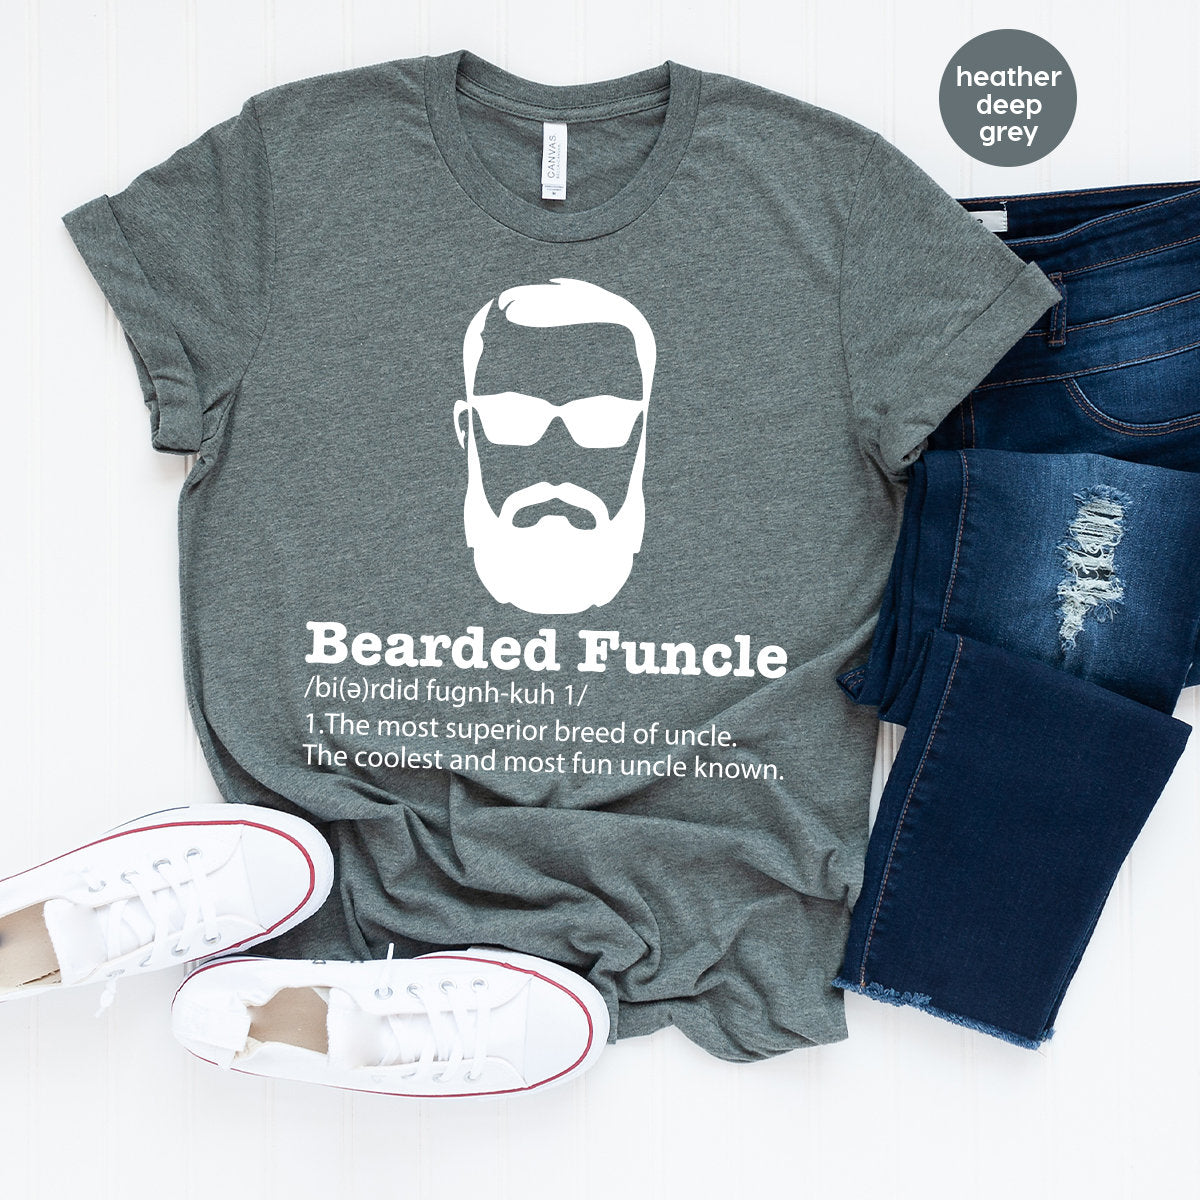 Bearded Funcle Shirt, Funny Uncle Shirt, Bearded Funcle Definition Shirt, Funny Family Gift,Uncle T Shirt,Bearded Uncle Shirt, Uncle Gift - Fastdeliverytees.com